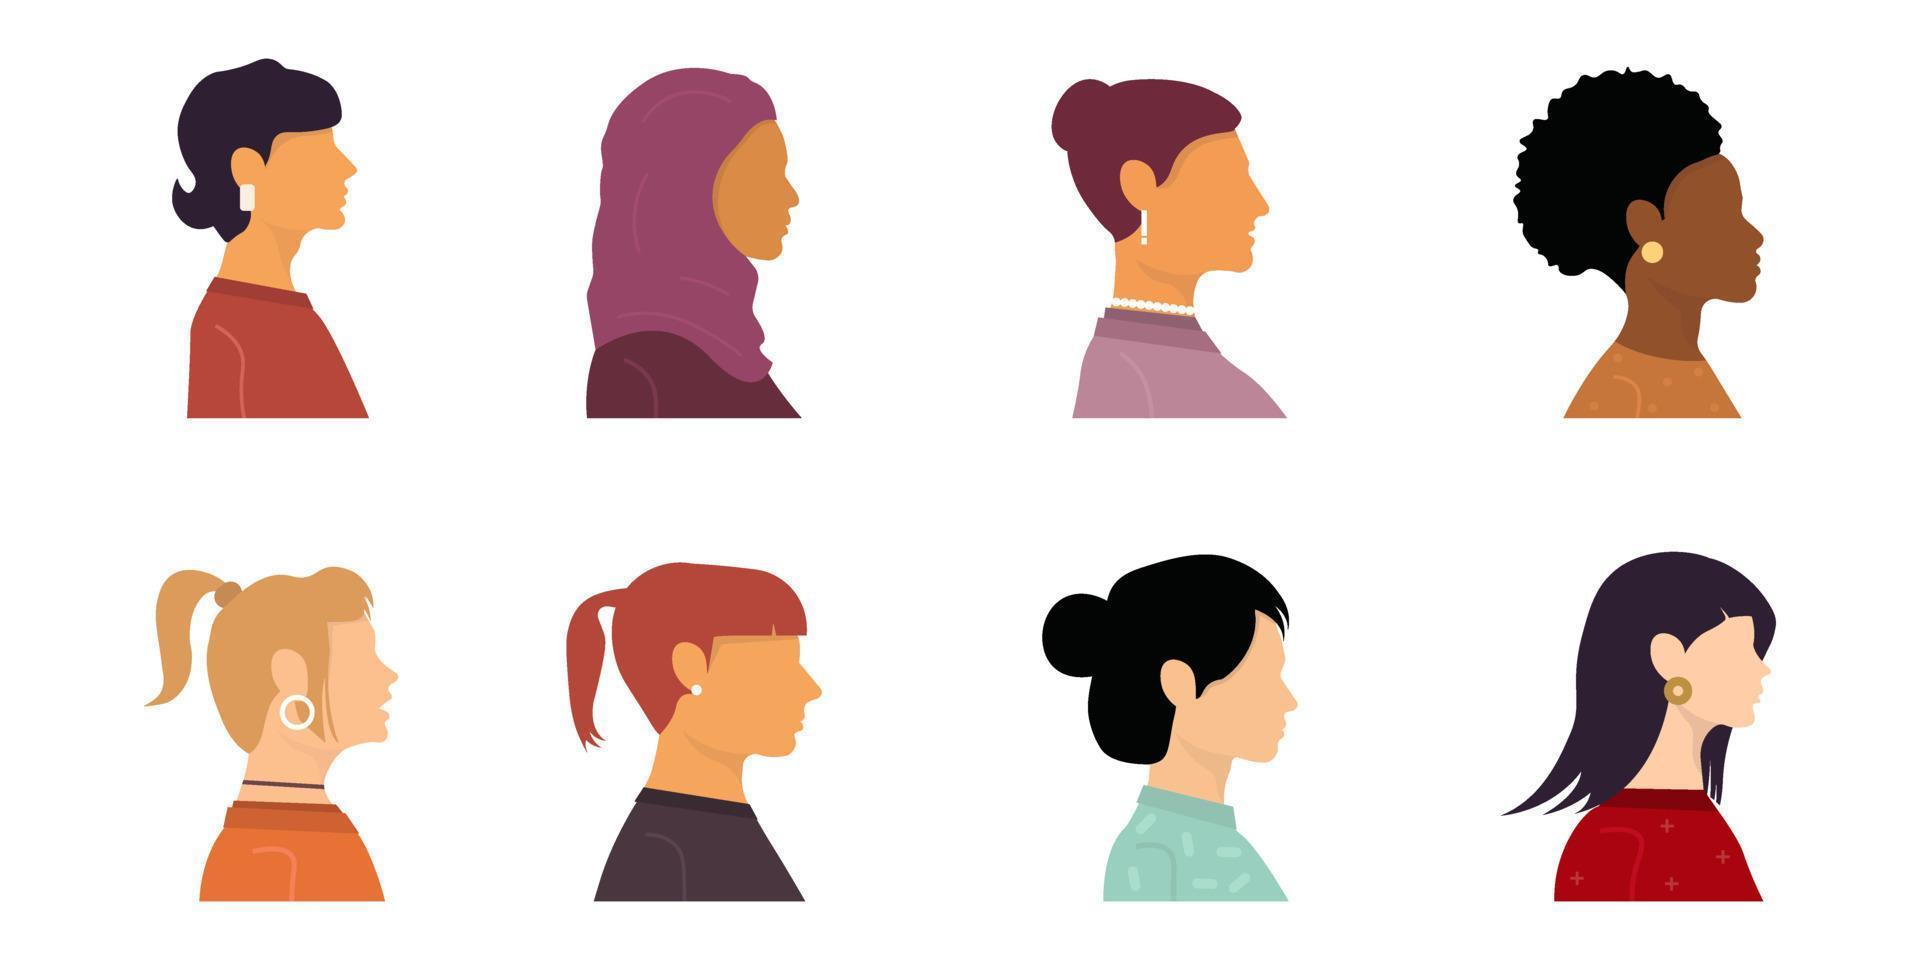 Collection of colorful flat avatars with different women's heads. Various nationalities. Side view. Blonde, brunette, redhead, European, African American, Asian, Muslim. Vector illustration.